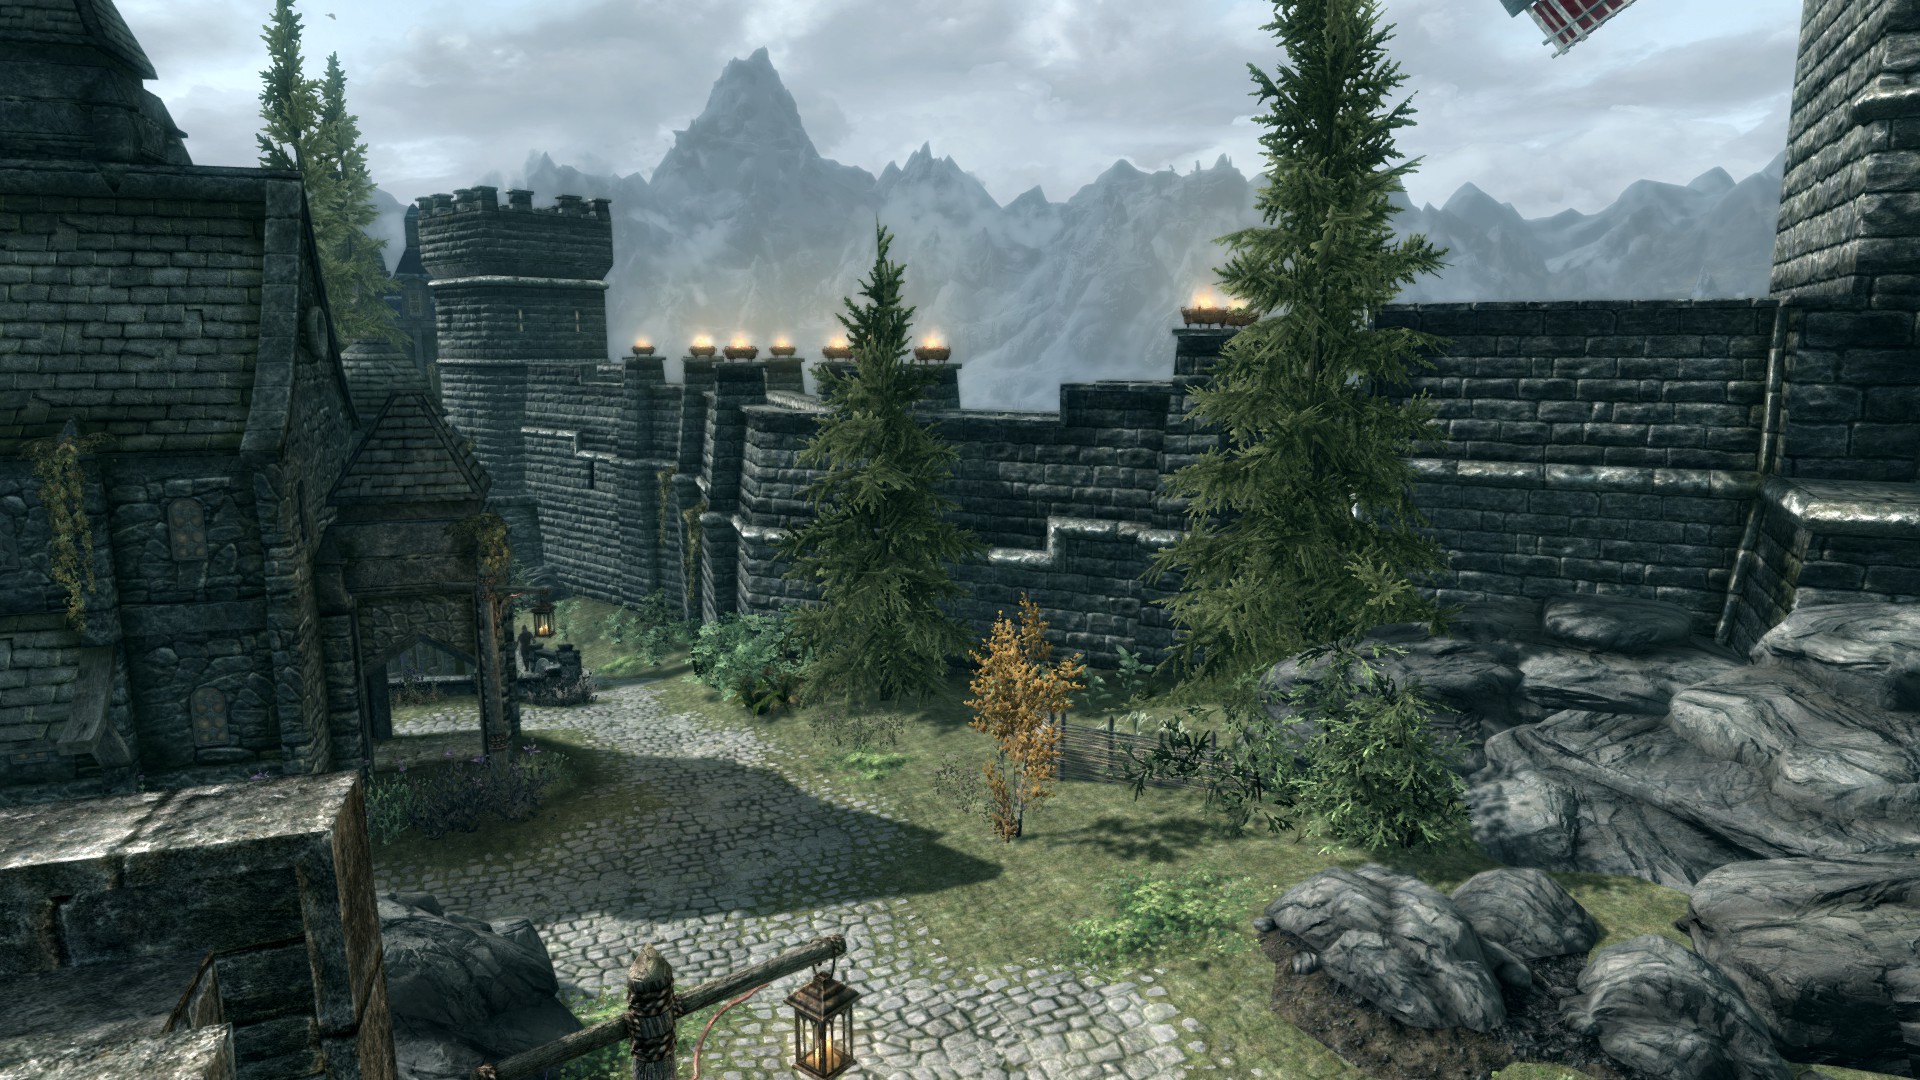 Images of my work in Skyrim